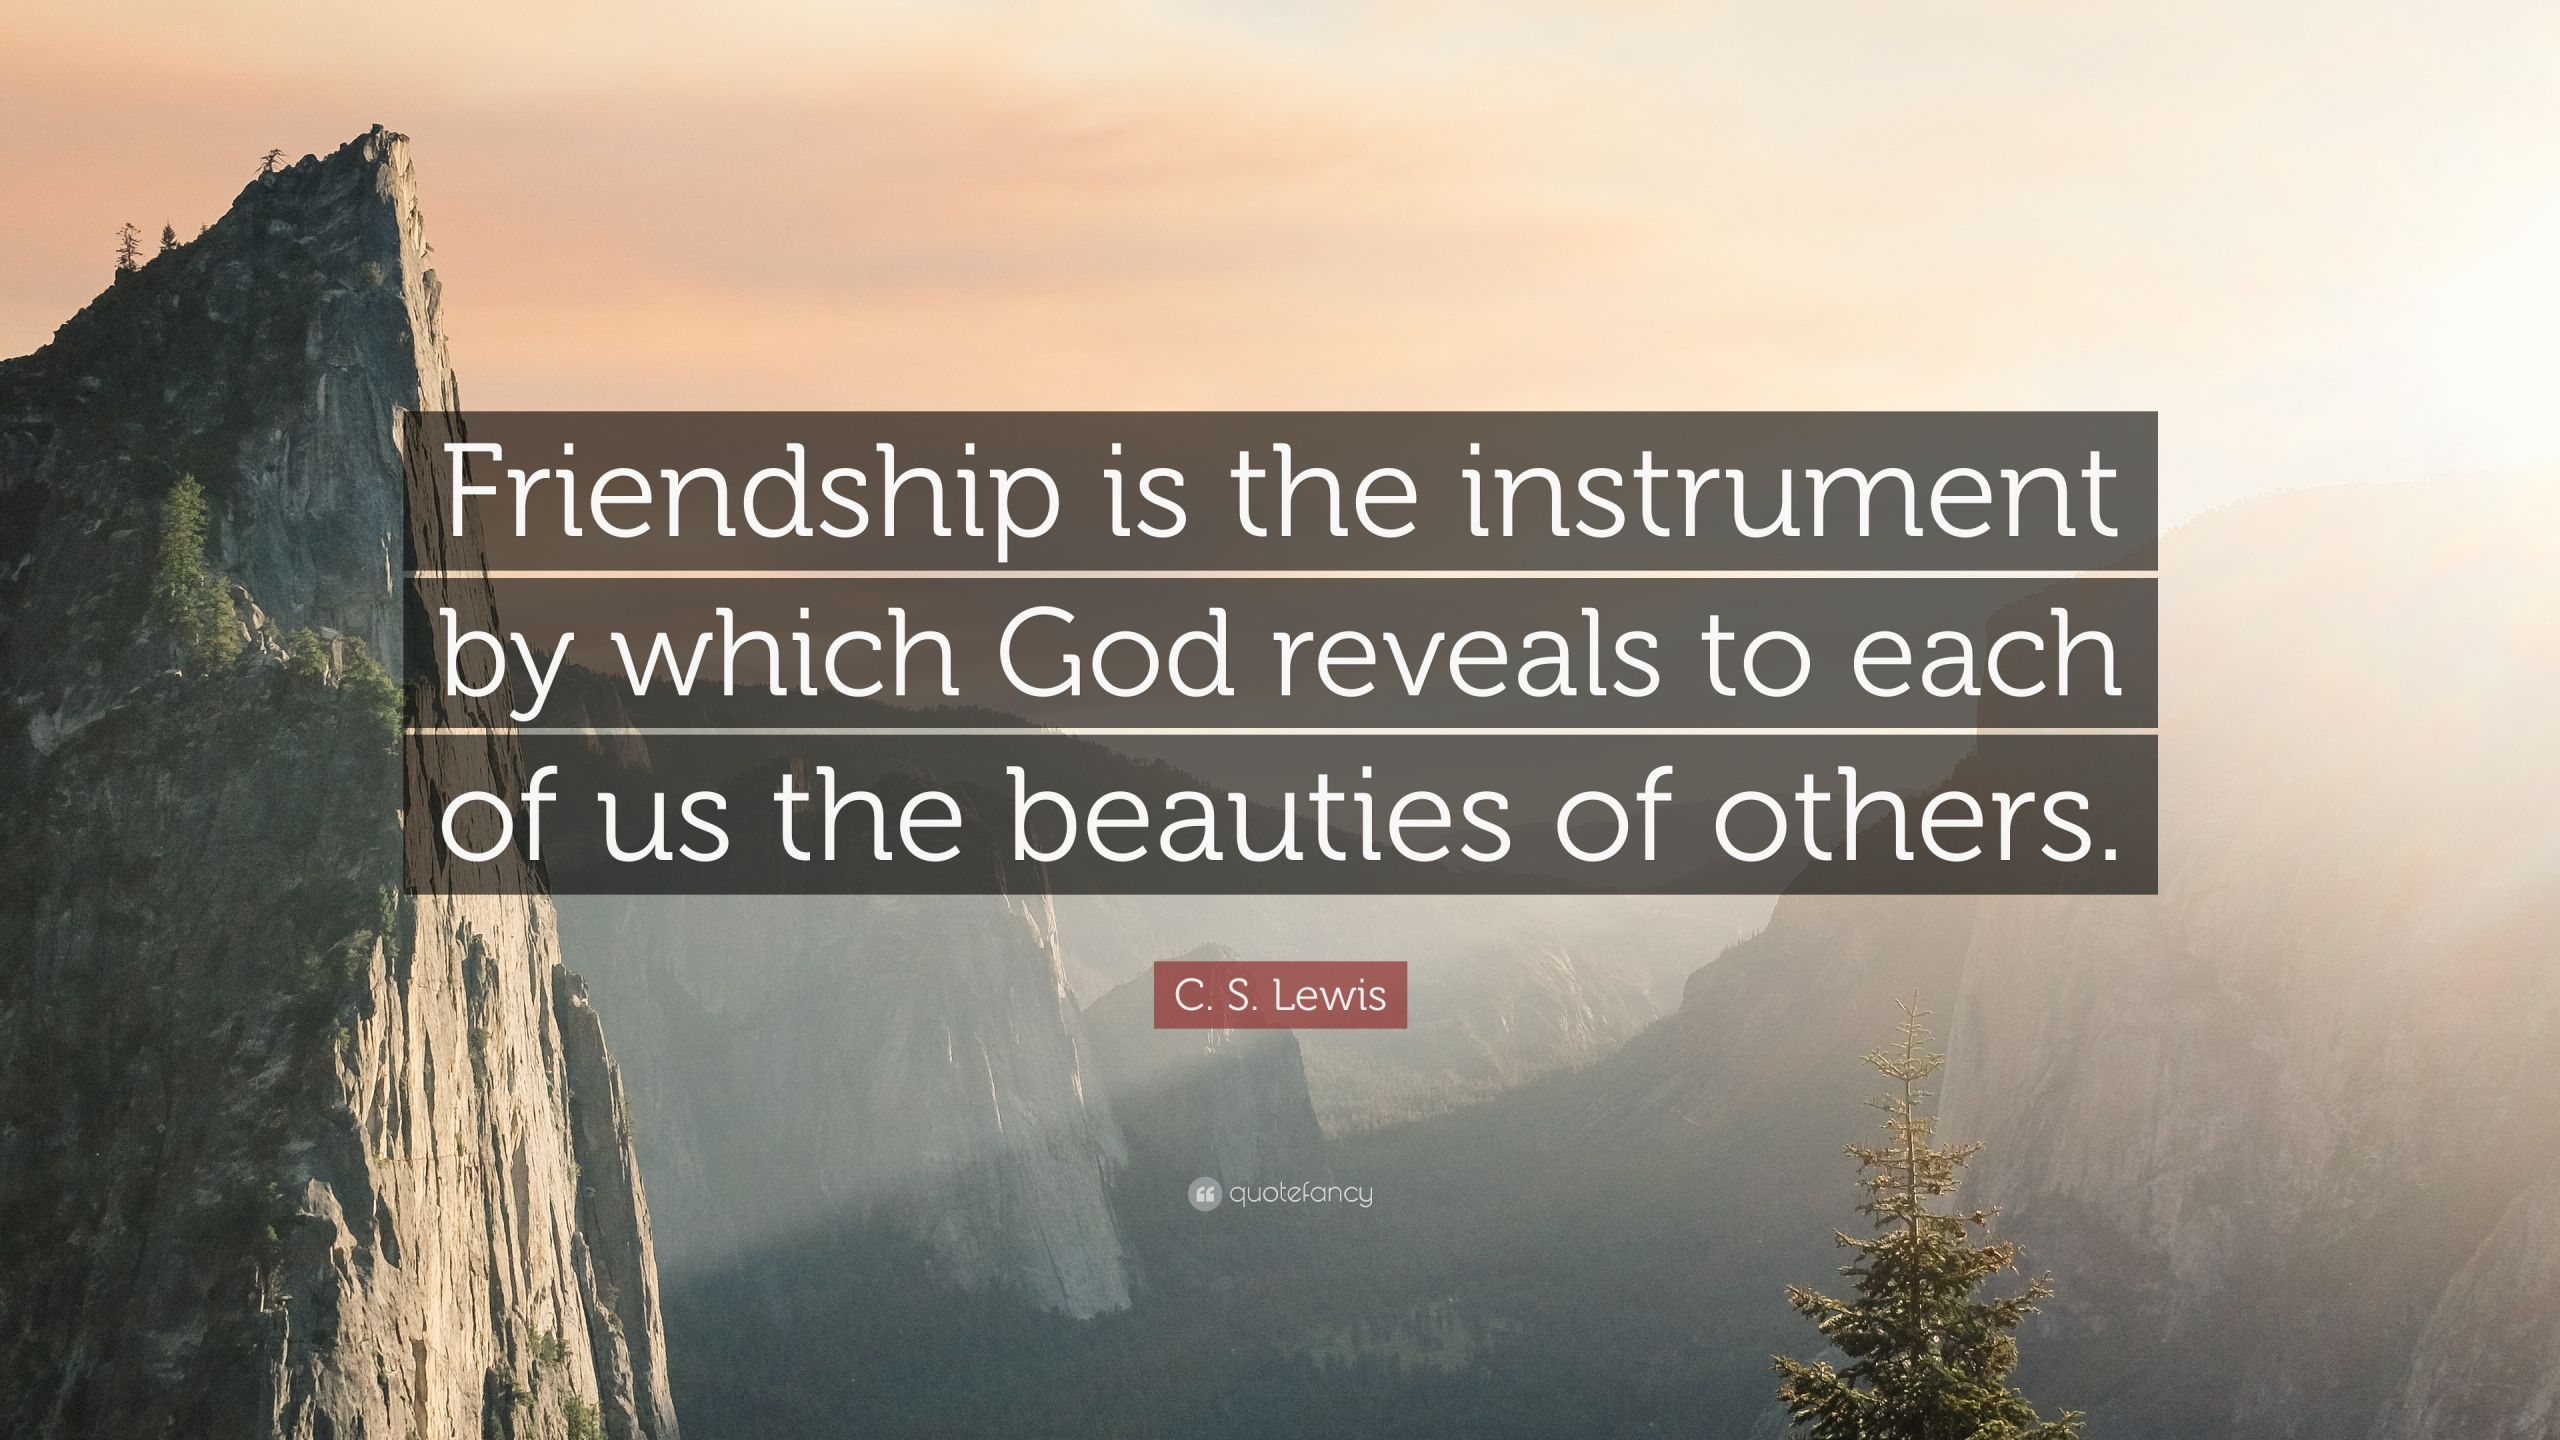 Cs Lewis Quote On Friendship
 C S Lewis Quote “Friendship is the instrument by which